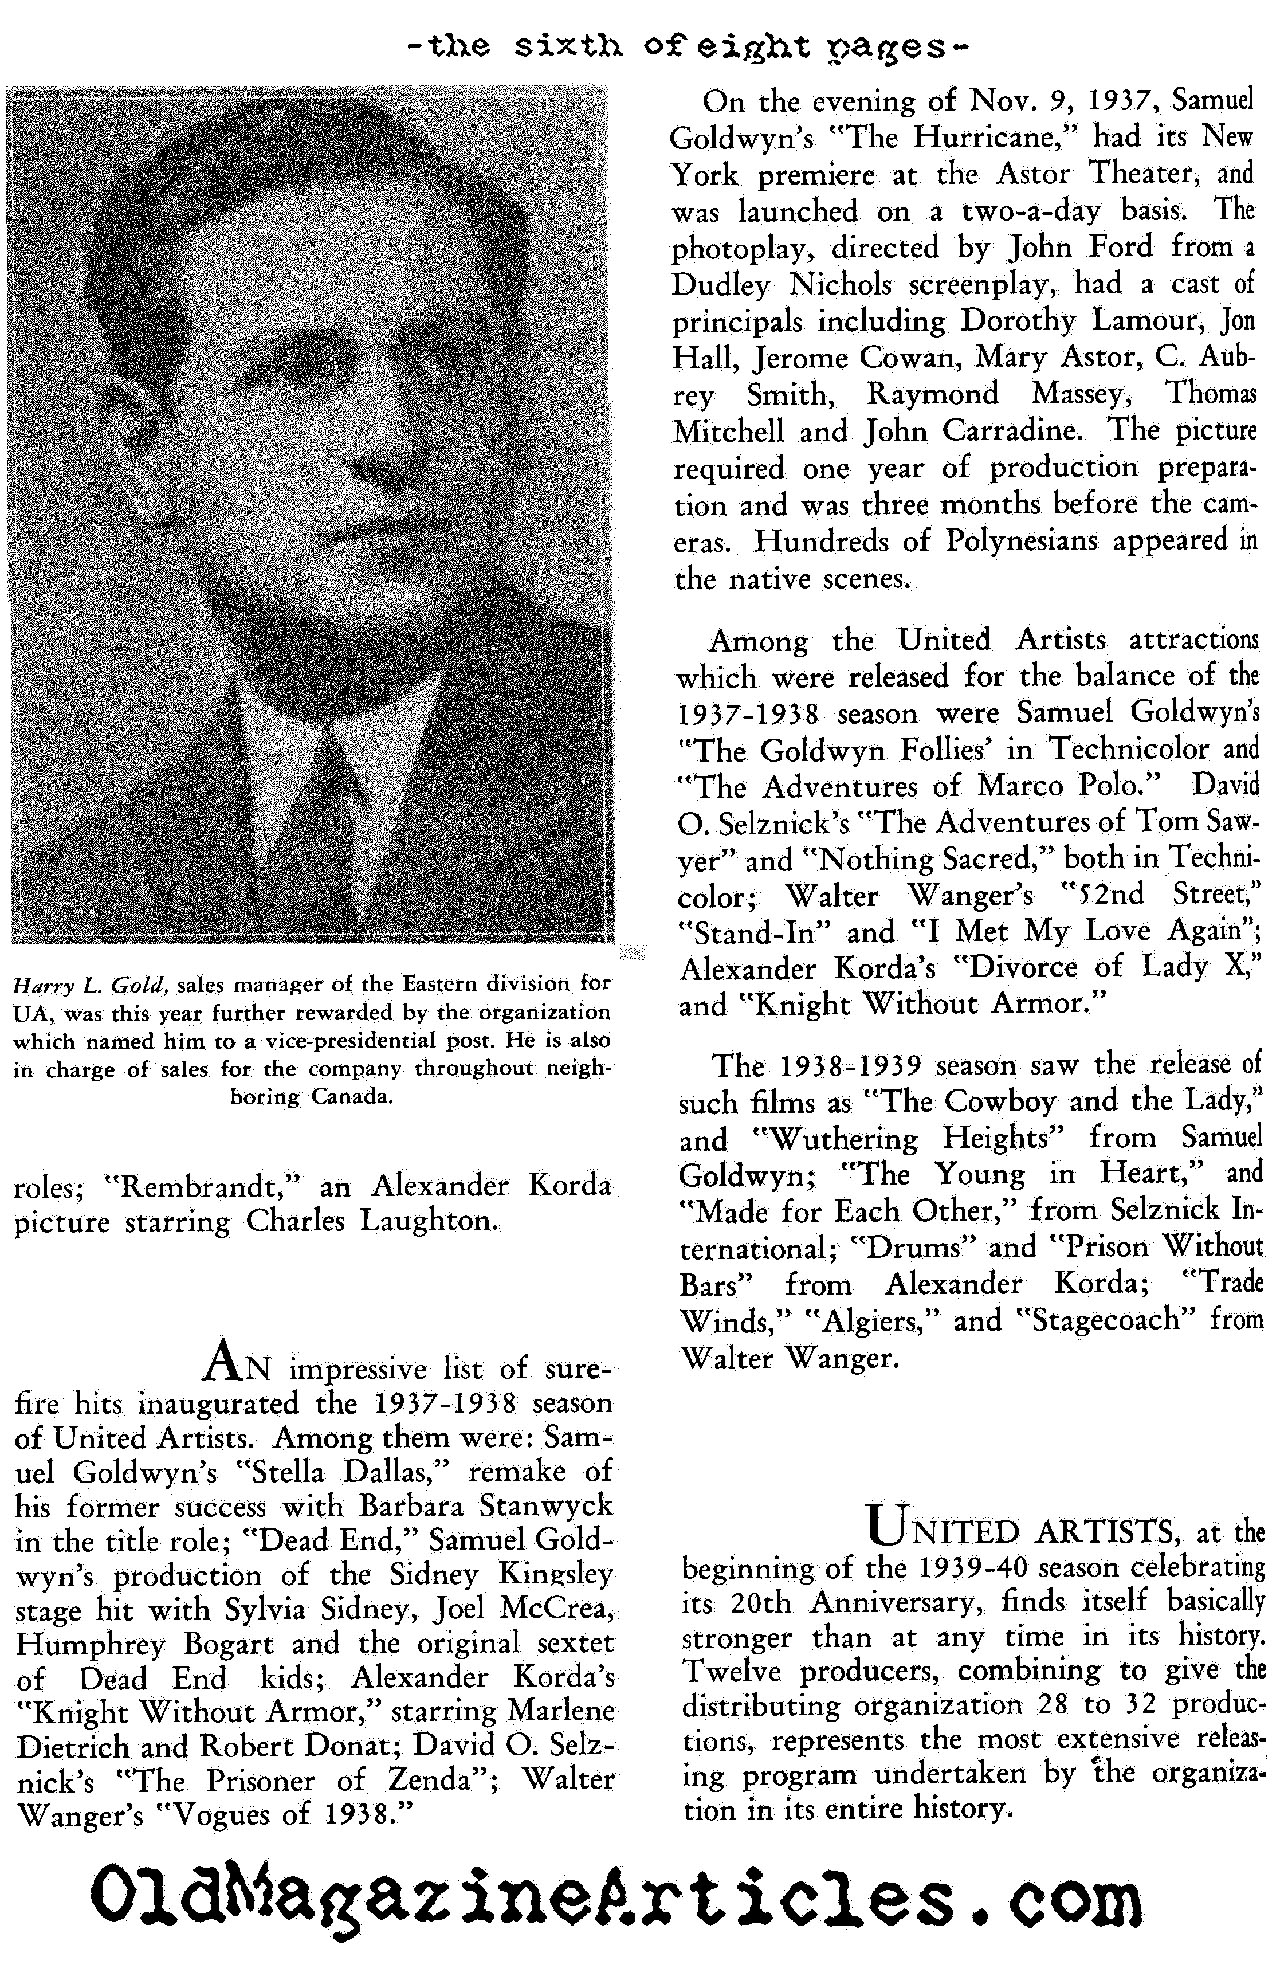 Charlie Chaplin Joins With Pickford, Fairbanks and Griffith to Form United Artists<br>  (Film Daily, 1939)